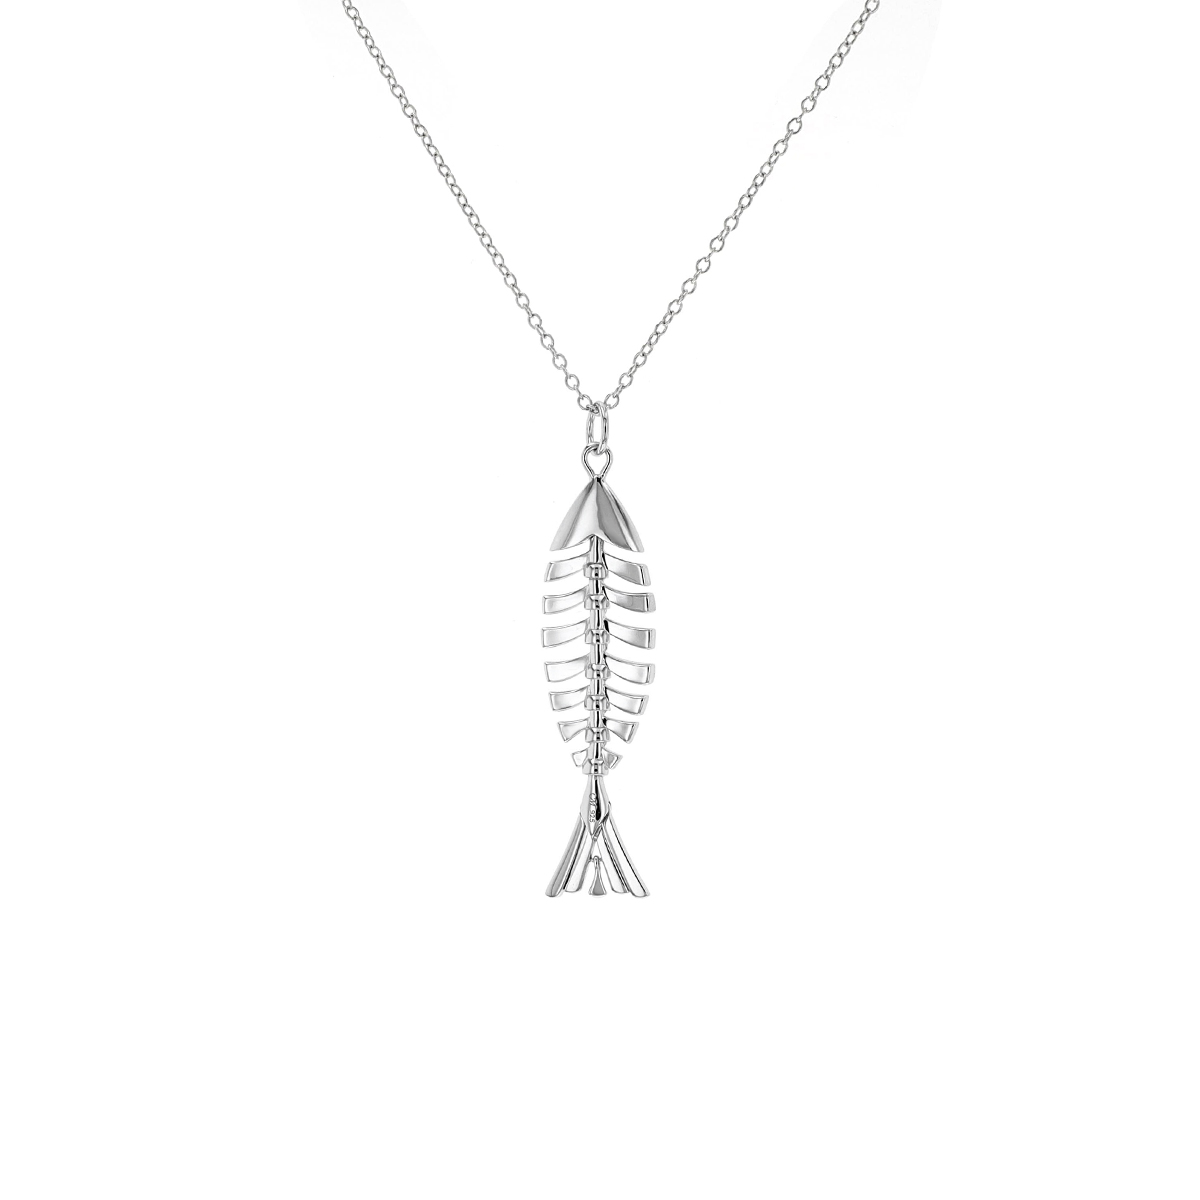 Sterling Silver Fishbones Pendant with Chain